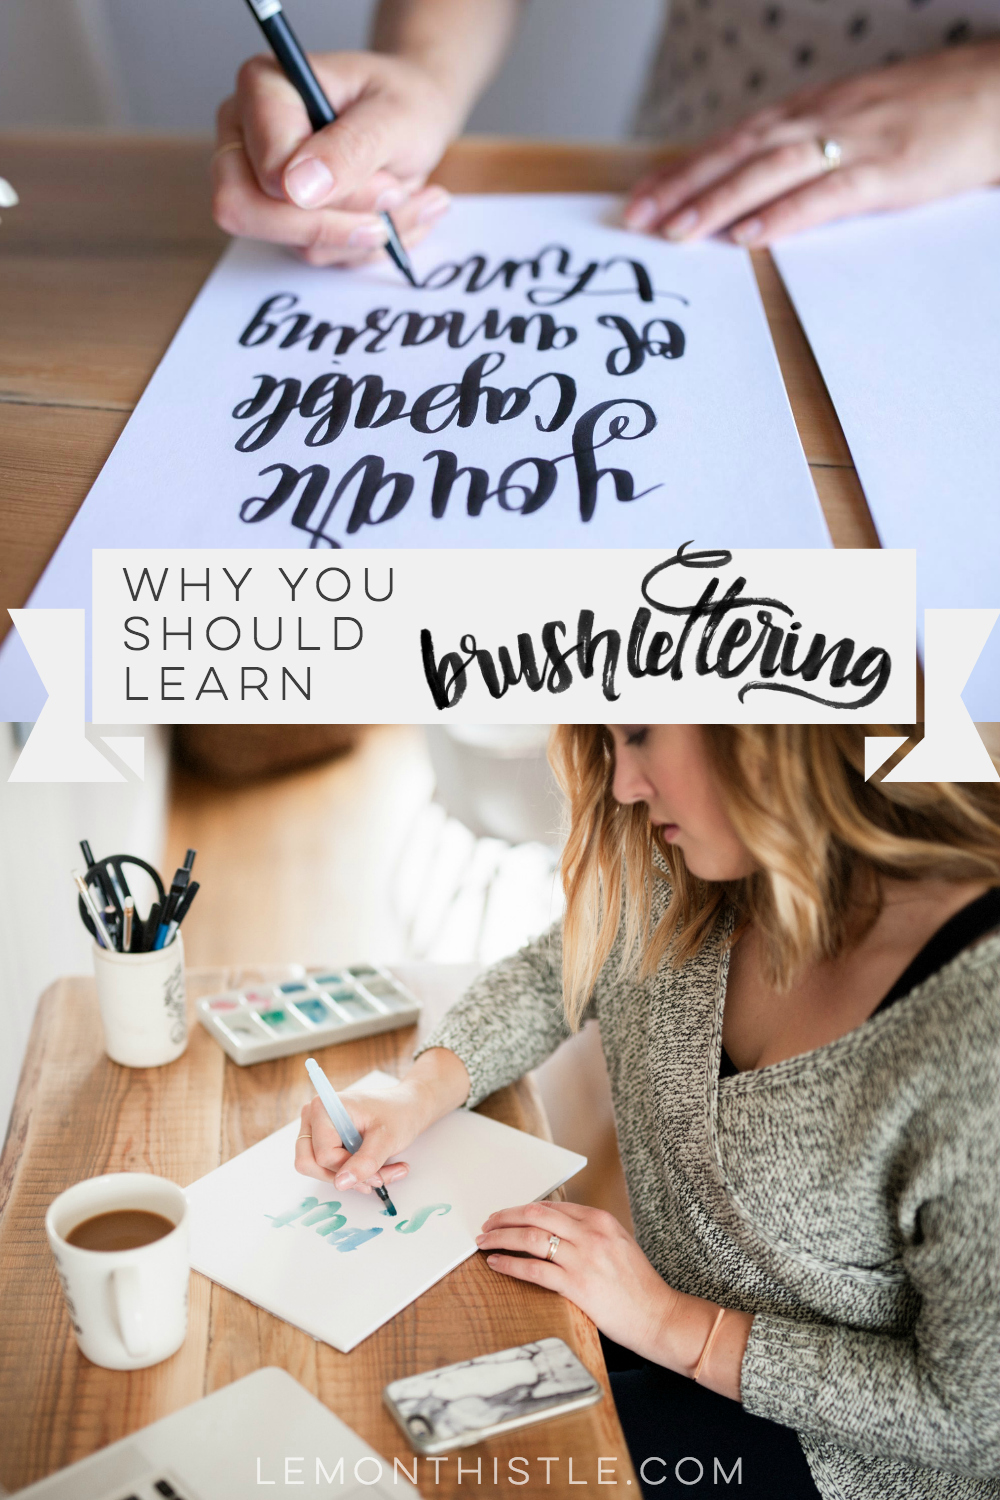 Why you should learn brush lettering. I love this! Such great reasons and I love the story 